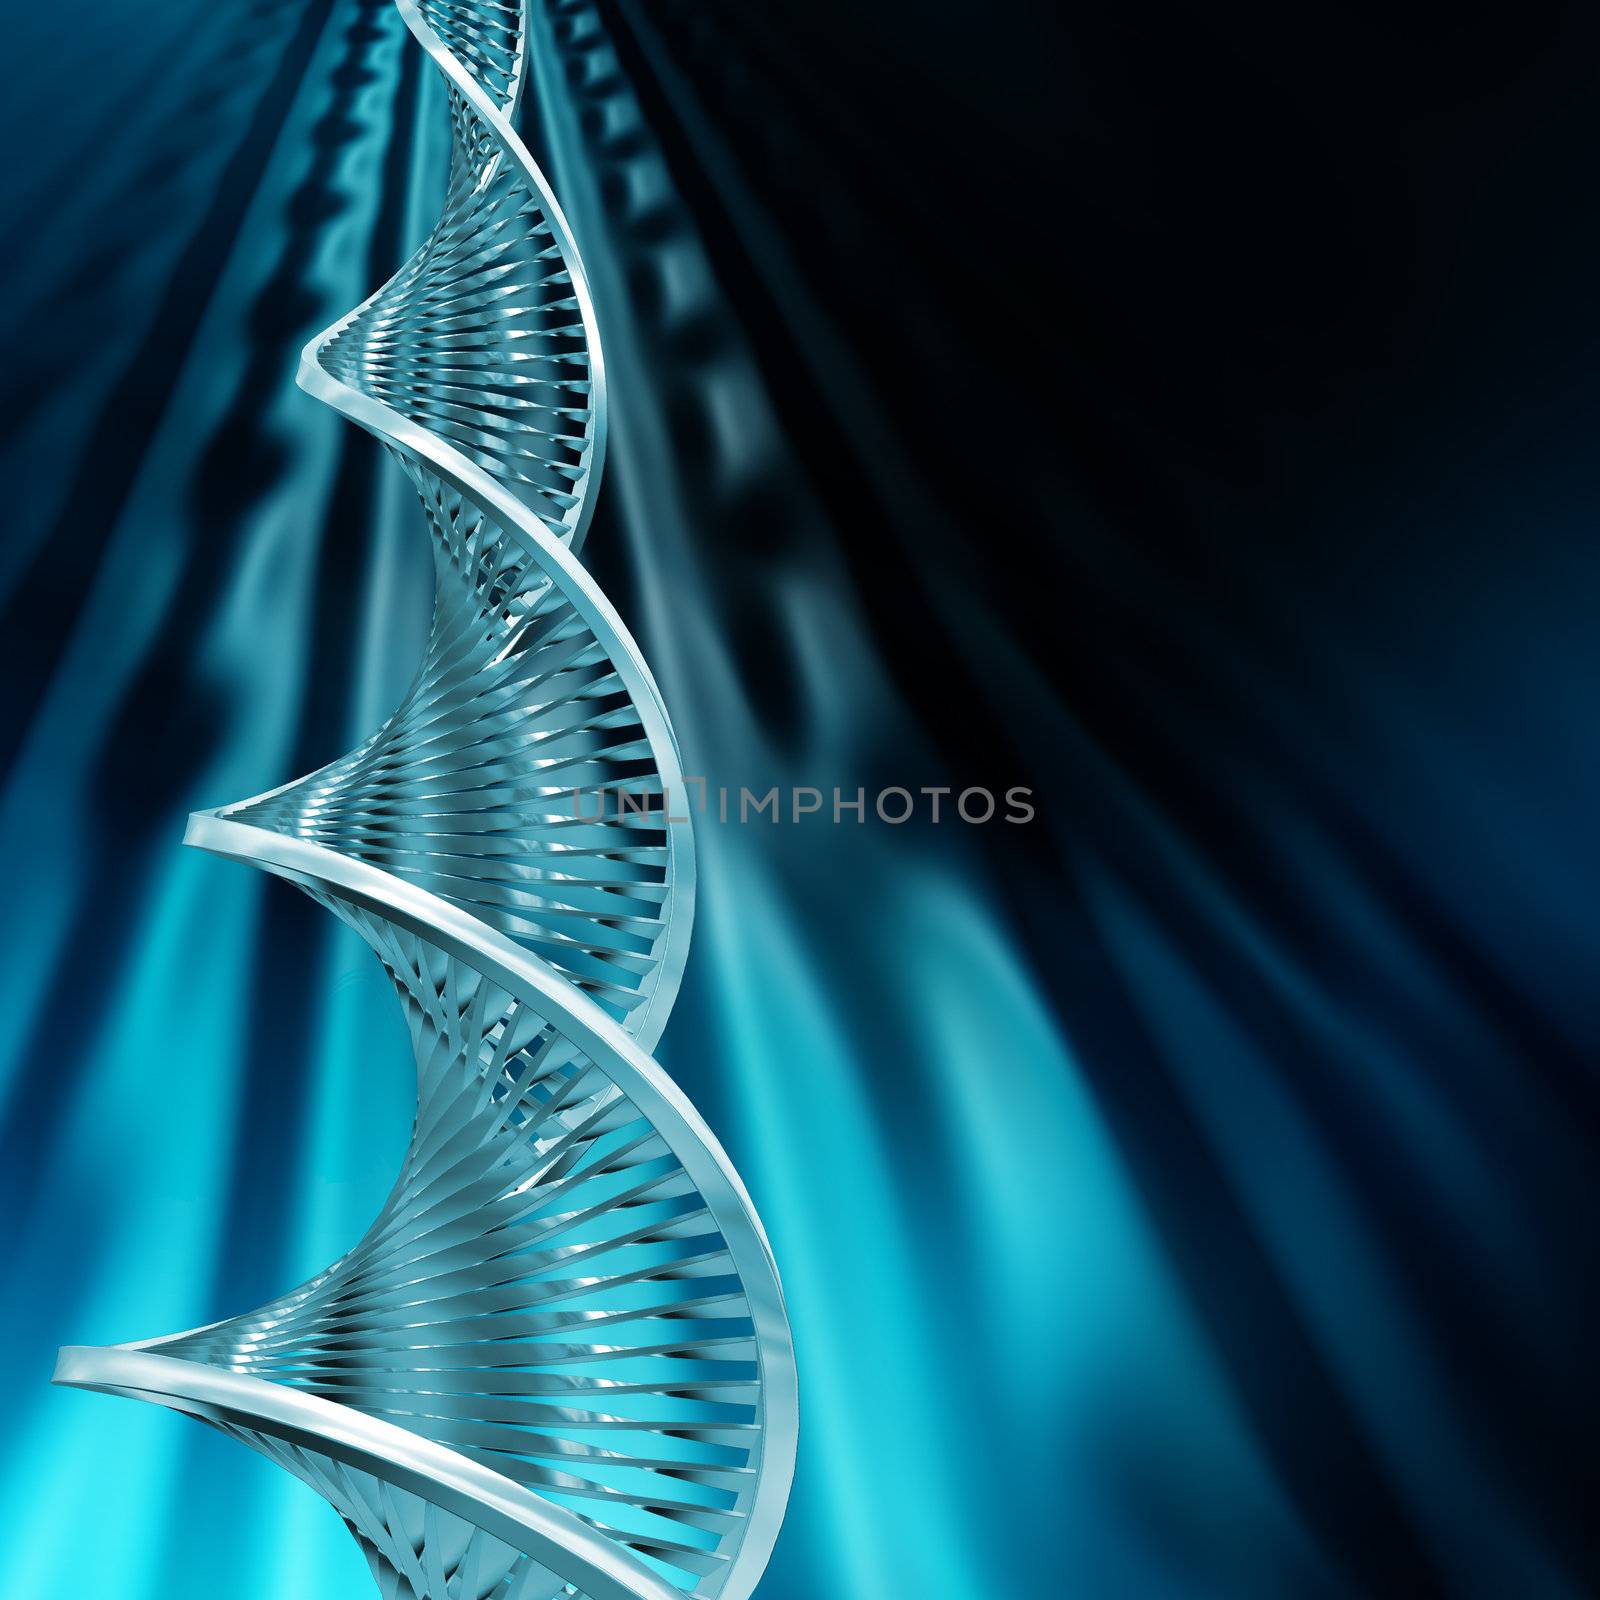 DNA Abstract by kjpargeter